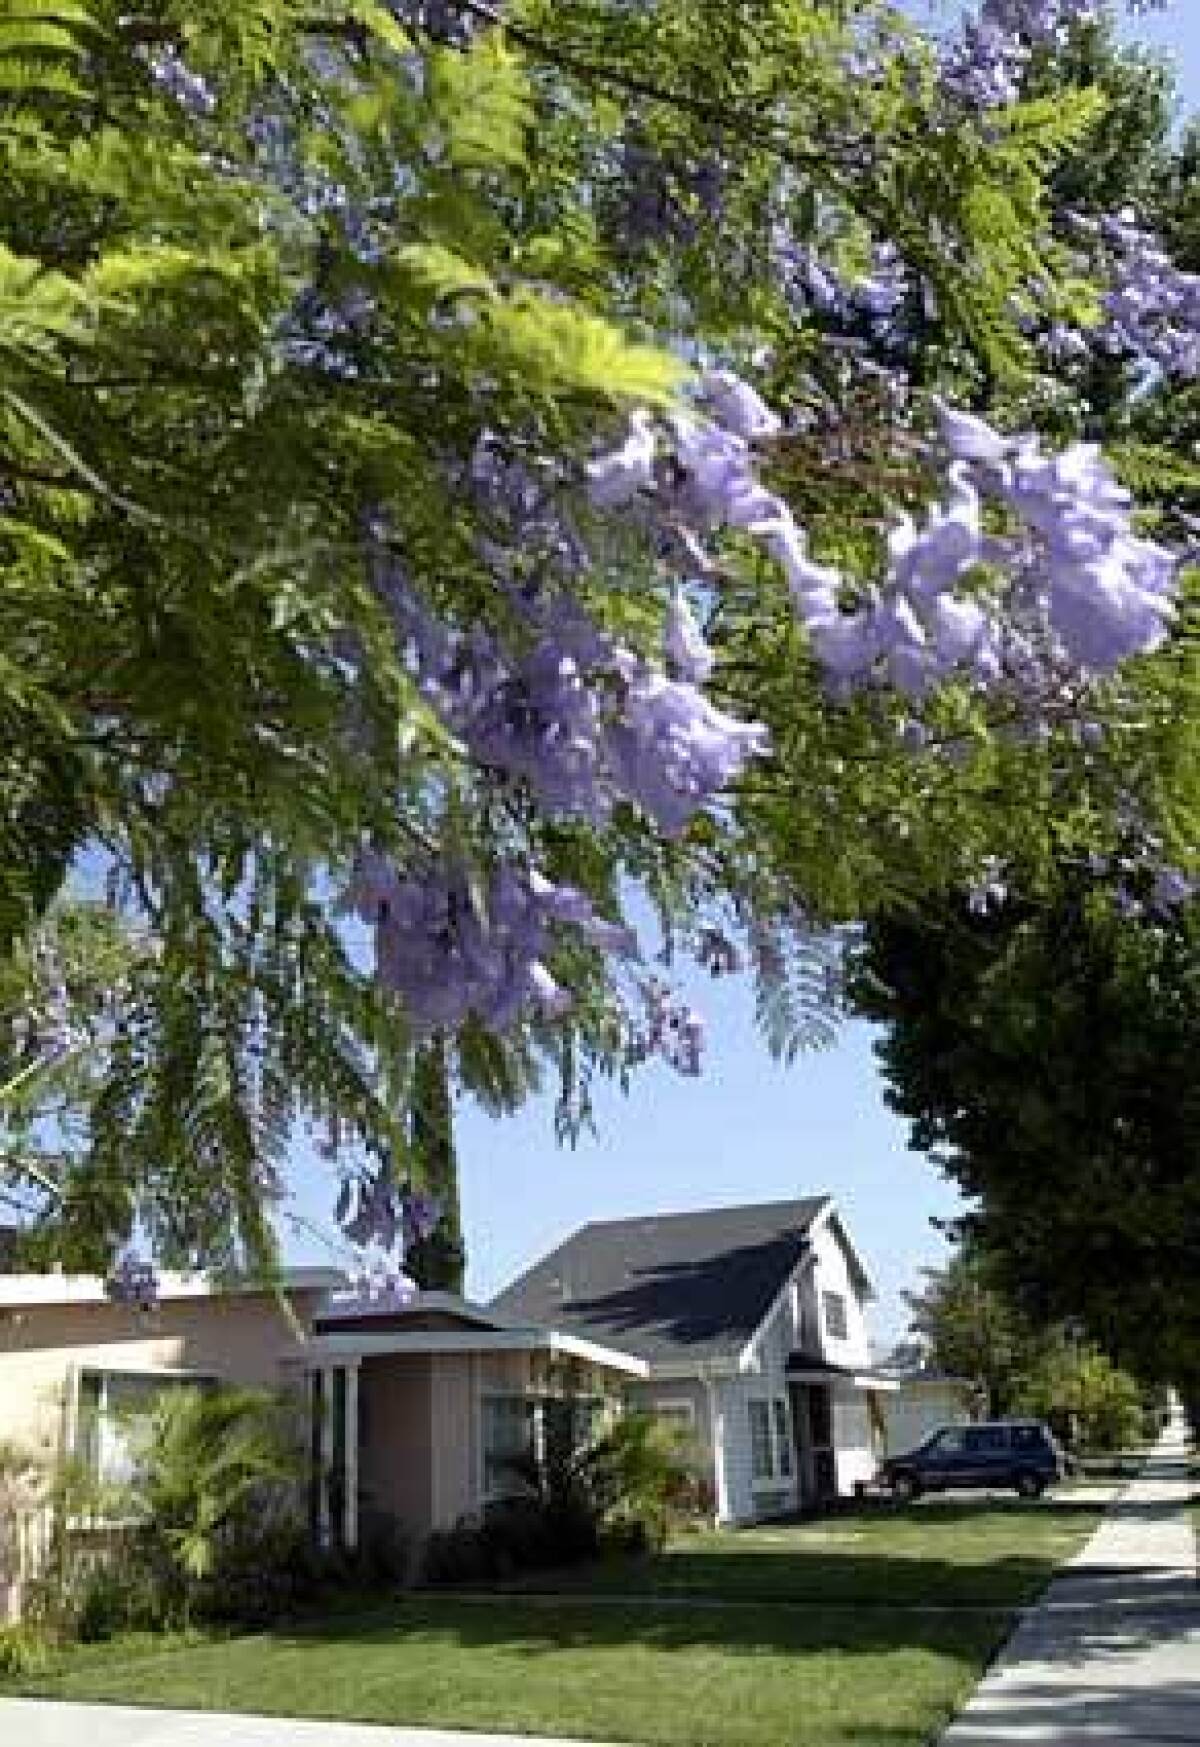 Trees add character and help cool tract homes along Aldea Avenue.